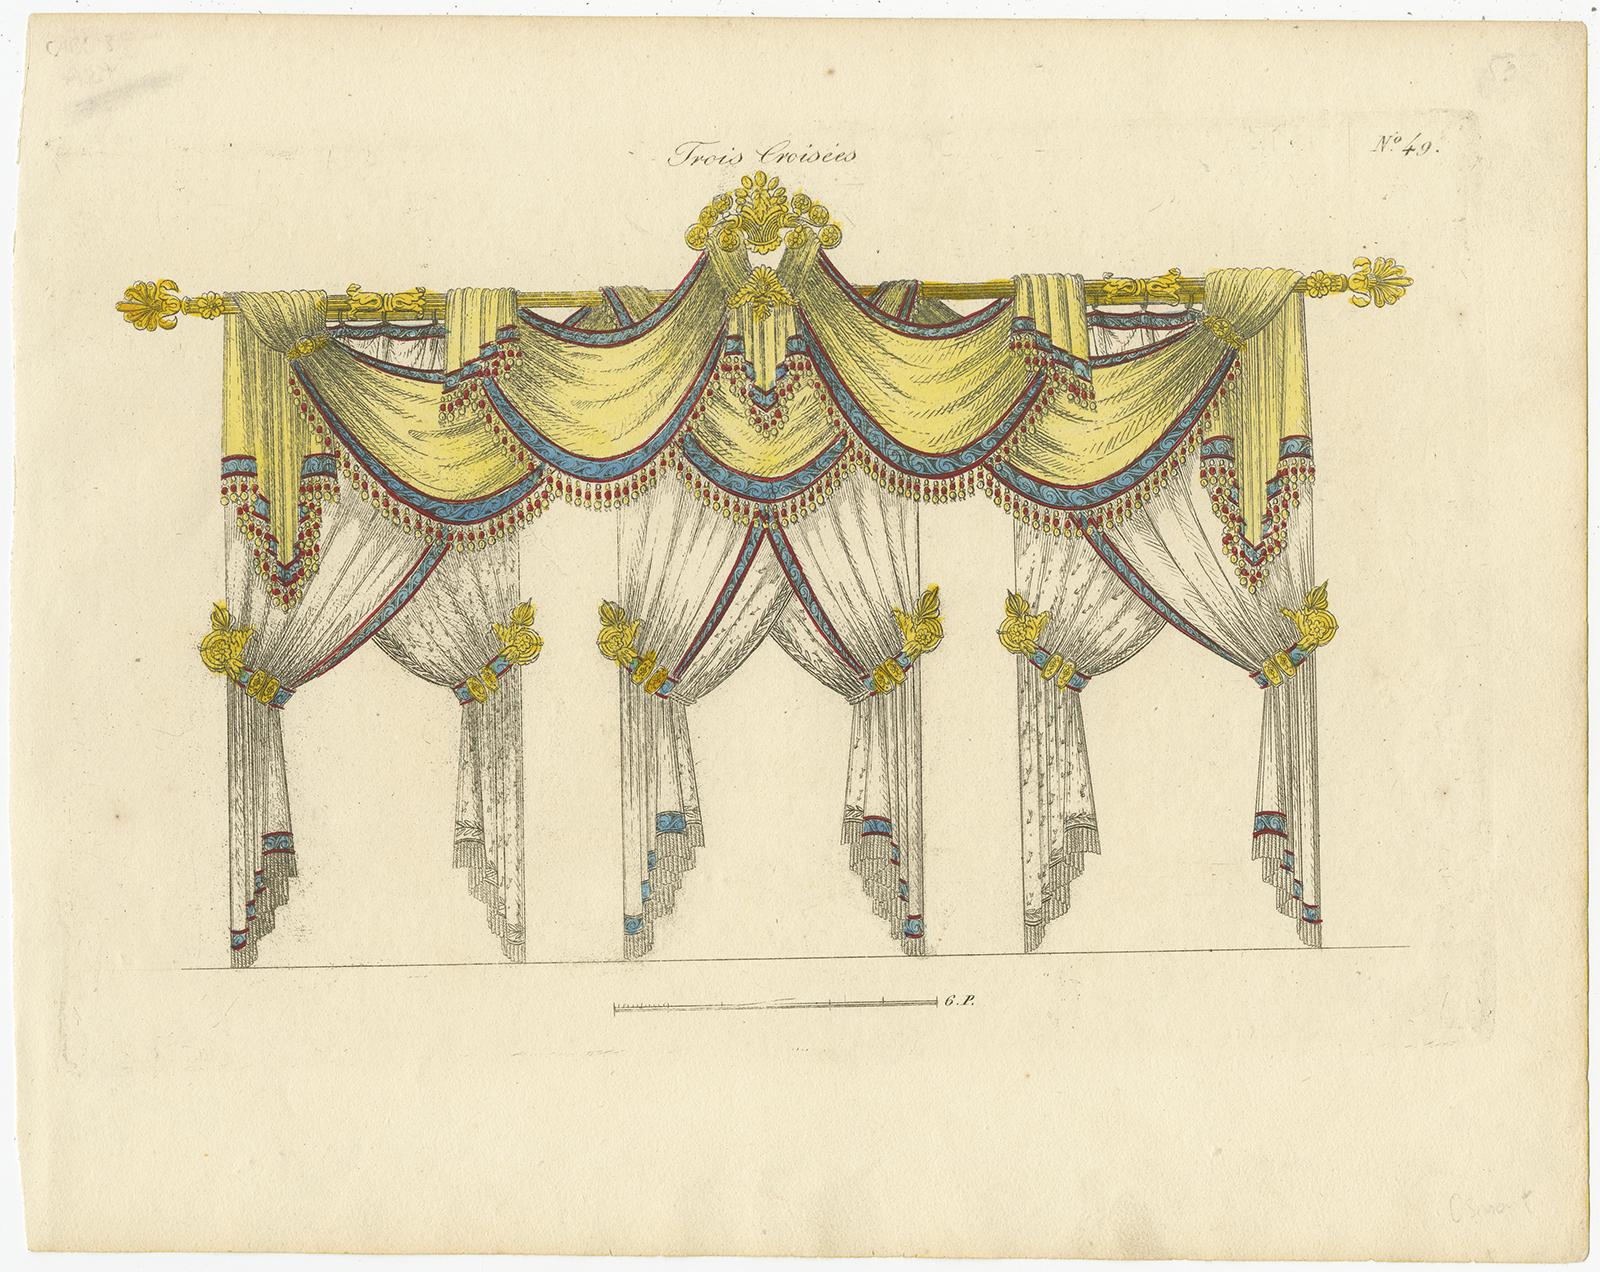 Beatiful set of eleven antique prints depicting various draperies. Part of a series of 7 cahiers issued in Paris by Hallavant, Osmont and Pinsonniere between 1810 and 1839 with measured drawings of Empire style draperies for window treatments and